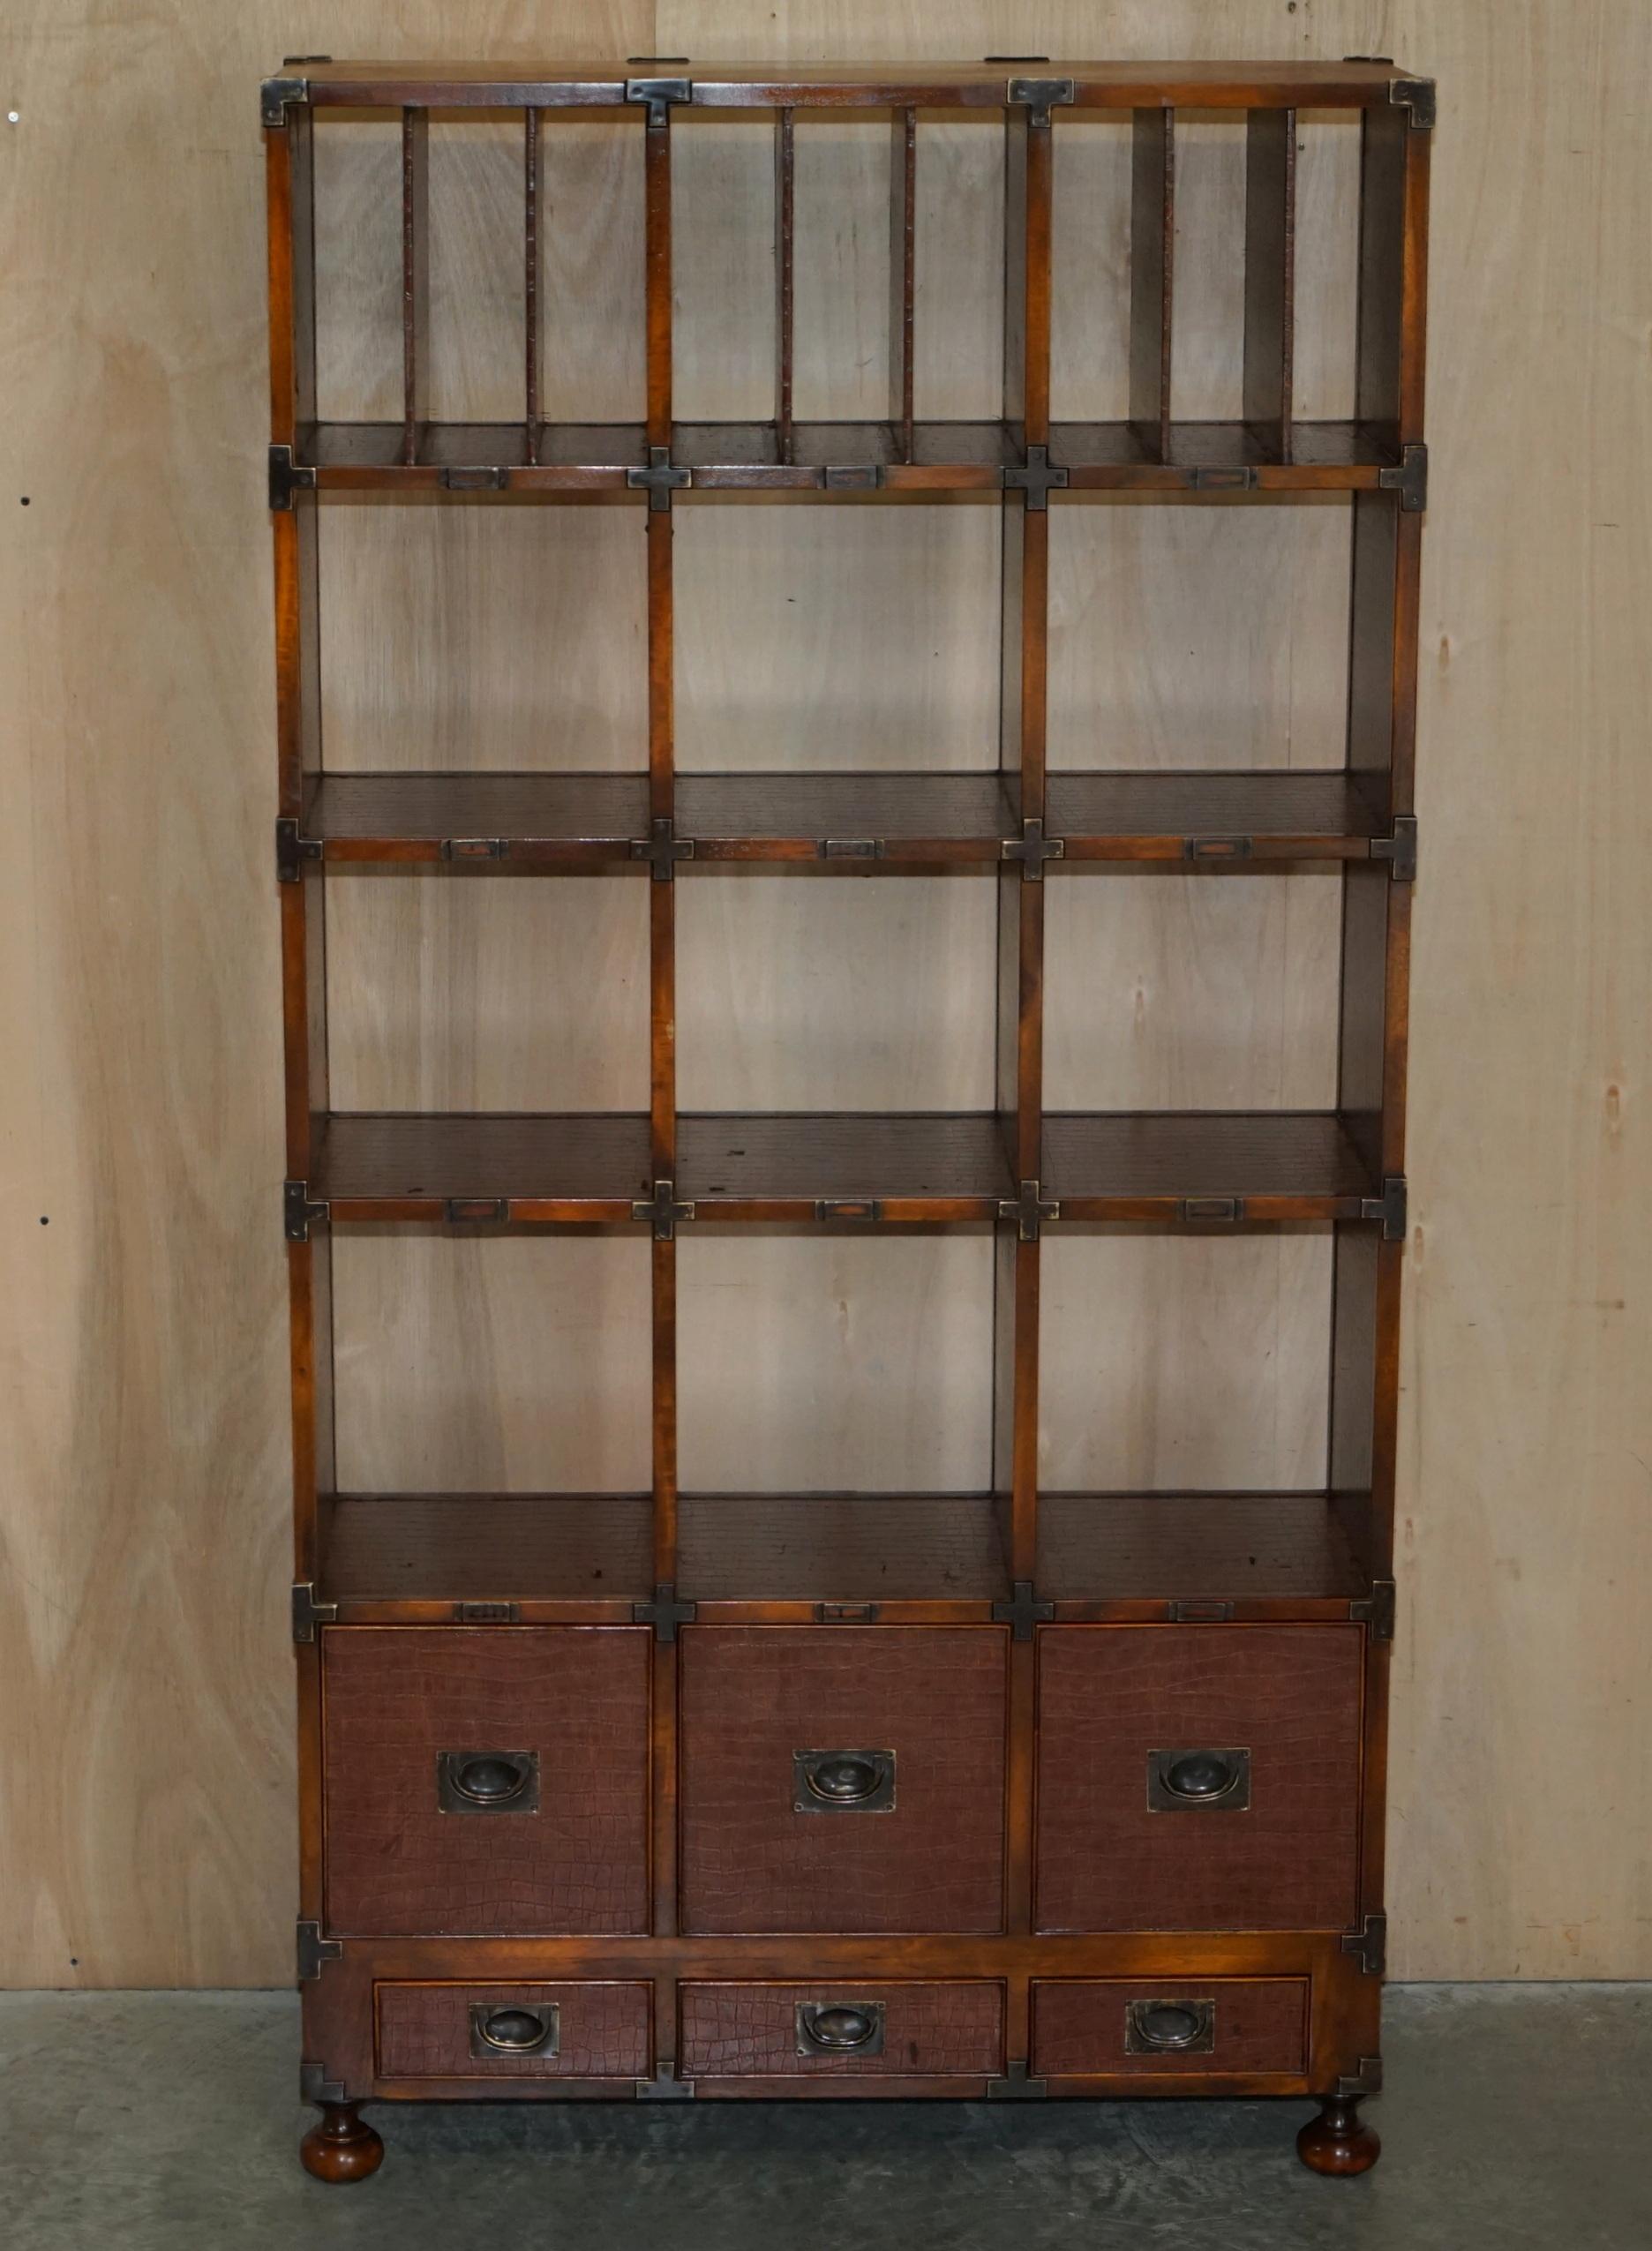 PAIR OF CROCODILE LEATHER Offene LiBRARY-BOOKCASES MIT DRAWERS & RECORD SLOTS (Art déco) im Angebot